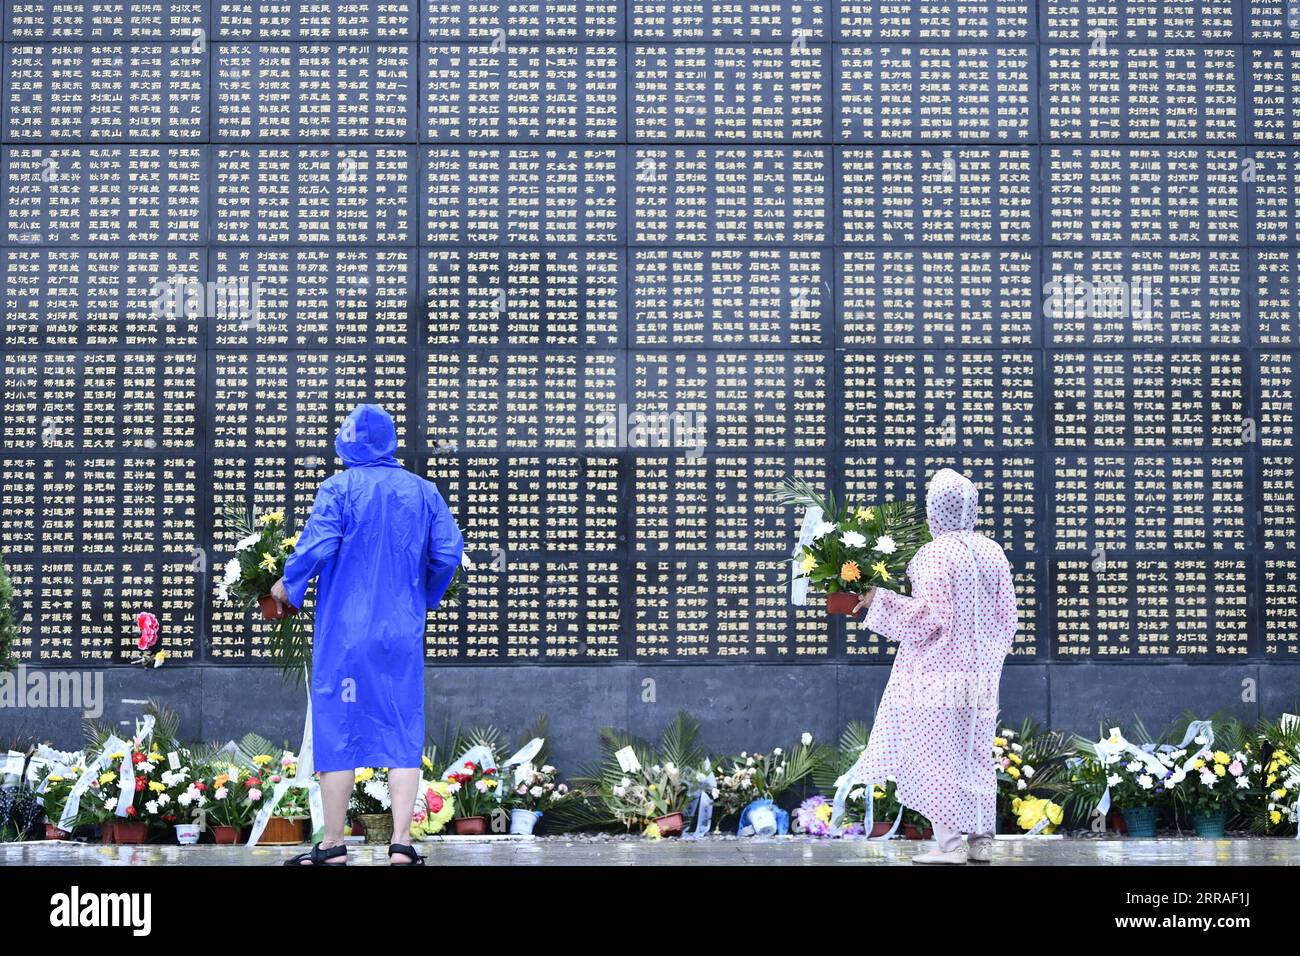 210728 -- TANGSHAN, July 28, 2021 -- People mourn for victims in the 1976 Tangshan earthquake at the Tangshan Earthquake Memorial Park in north China s Hebei Province, July 27, 2021. Wednesday marks the 45th anniversary of the Tangshan earthquake. The 7.8-magnitude quake struck the city of Tangshan in Hebei Province on July 28, 1976, killing more than 240,000 people and destroying virtually all buildings.  CHINA-HEBEI-TANGSHAN EARTHQUAKE-45TH ANNIVERSARY CN MuxYu PUBLICATIONxNOTxINxCHN Stock Photo